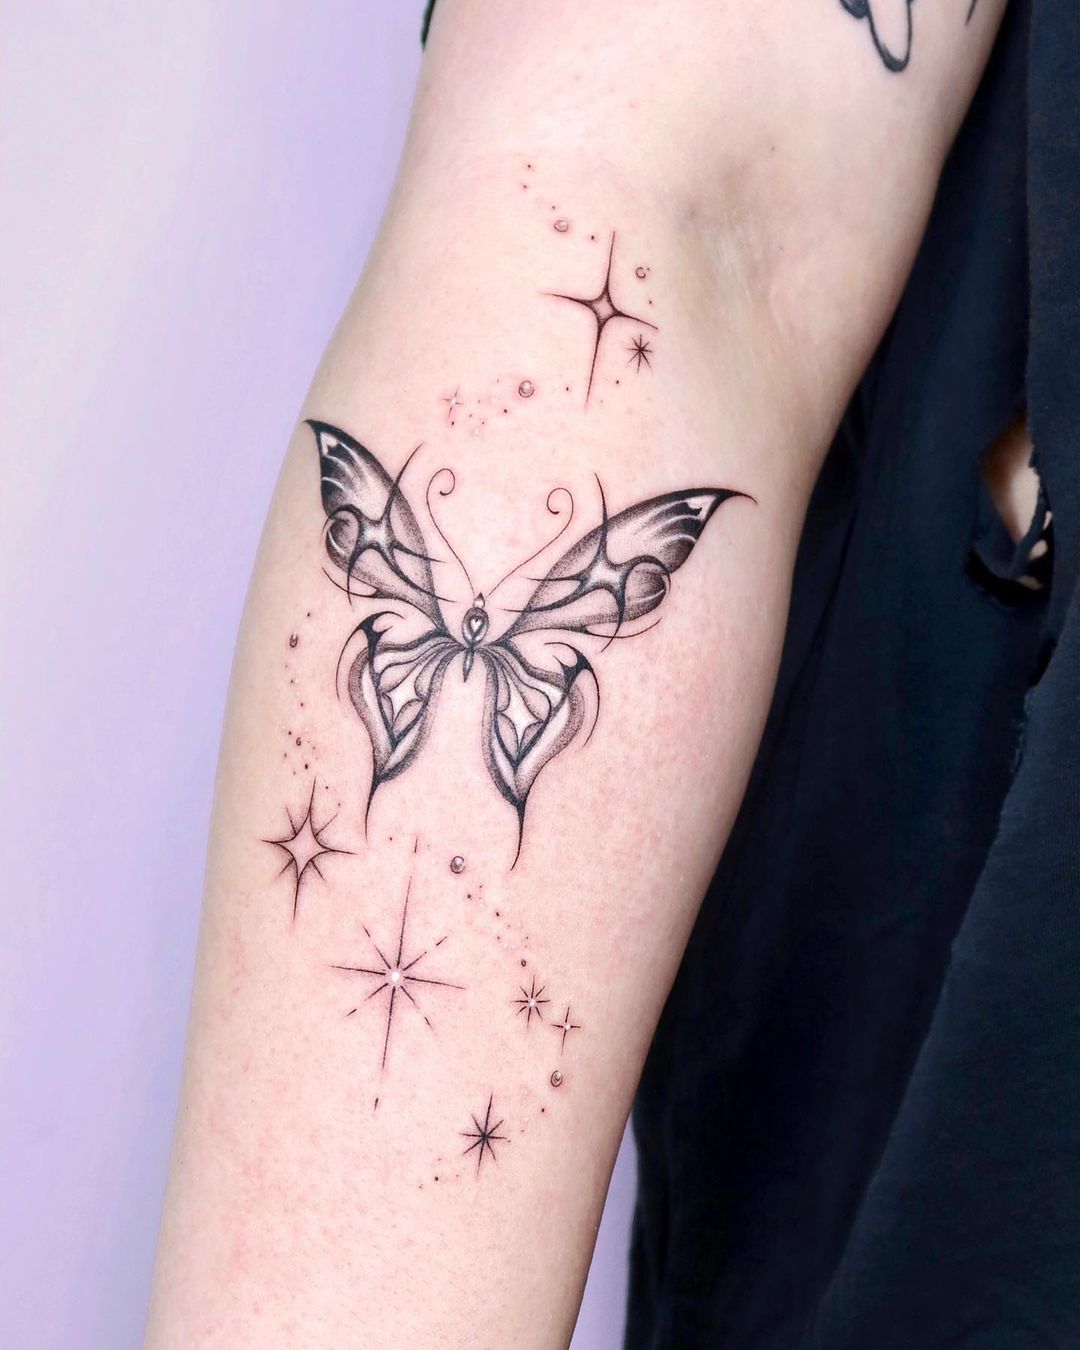 Gothic Butterfly Tattoo On Forearm With Stars